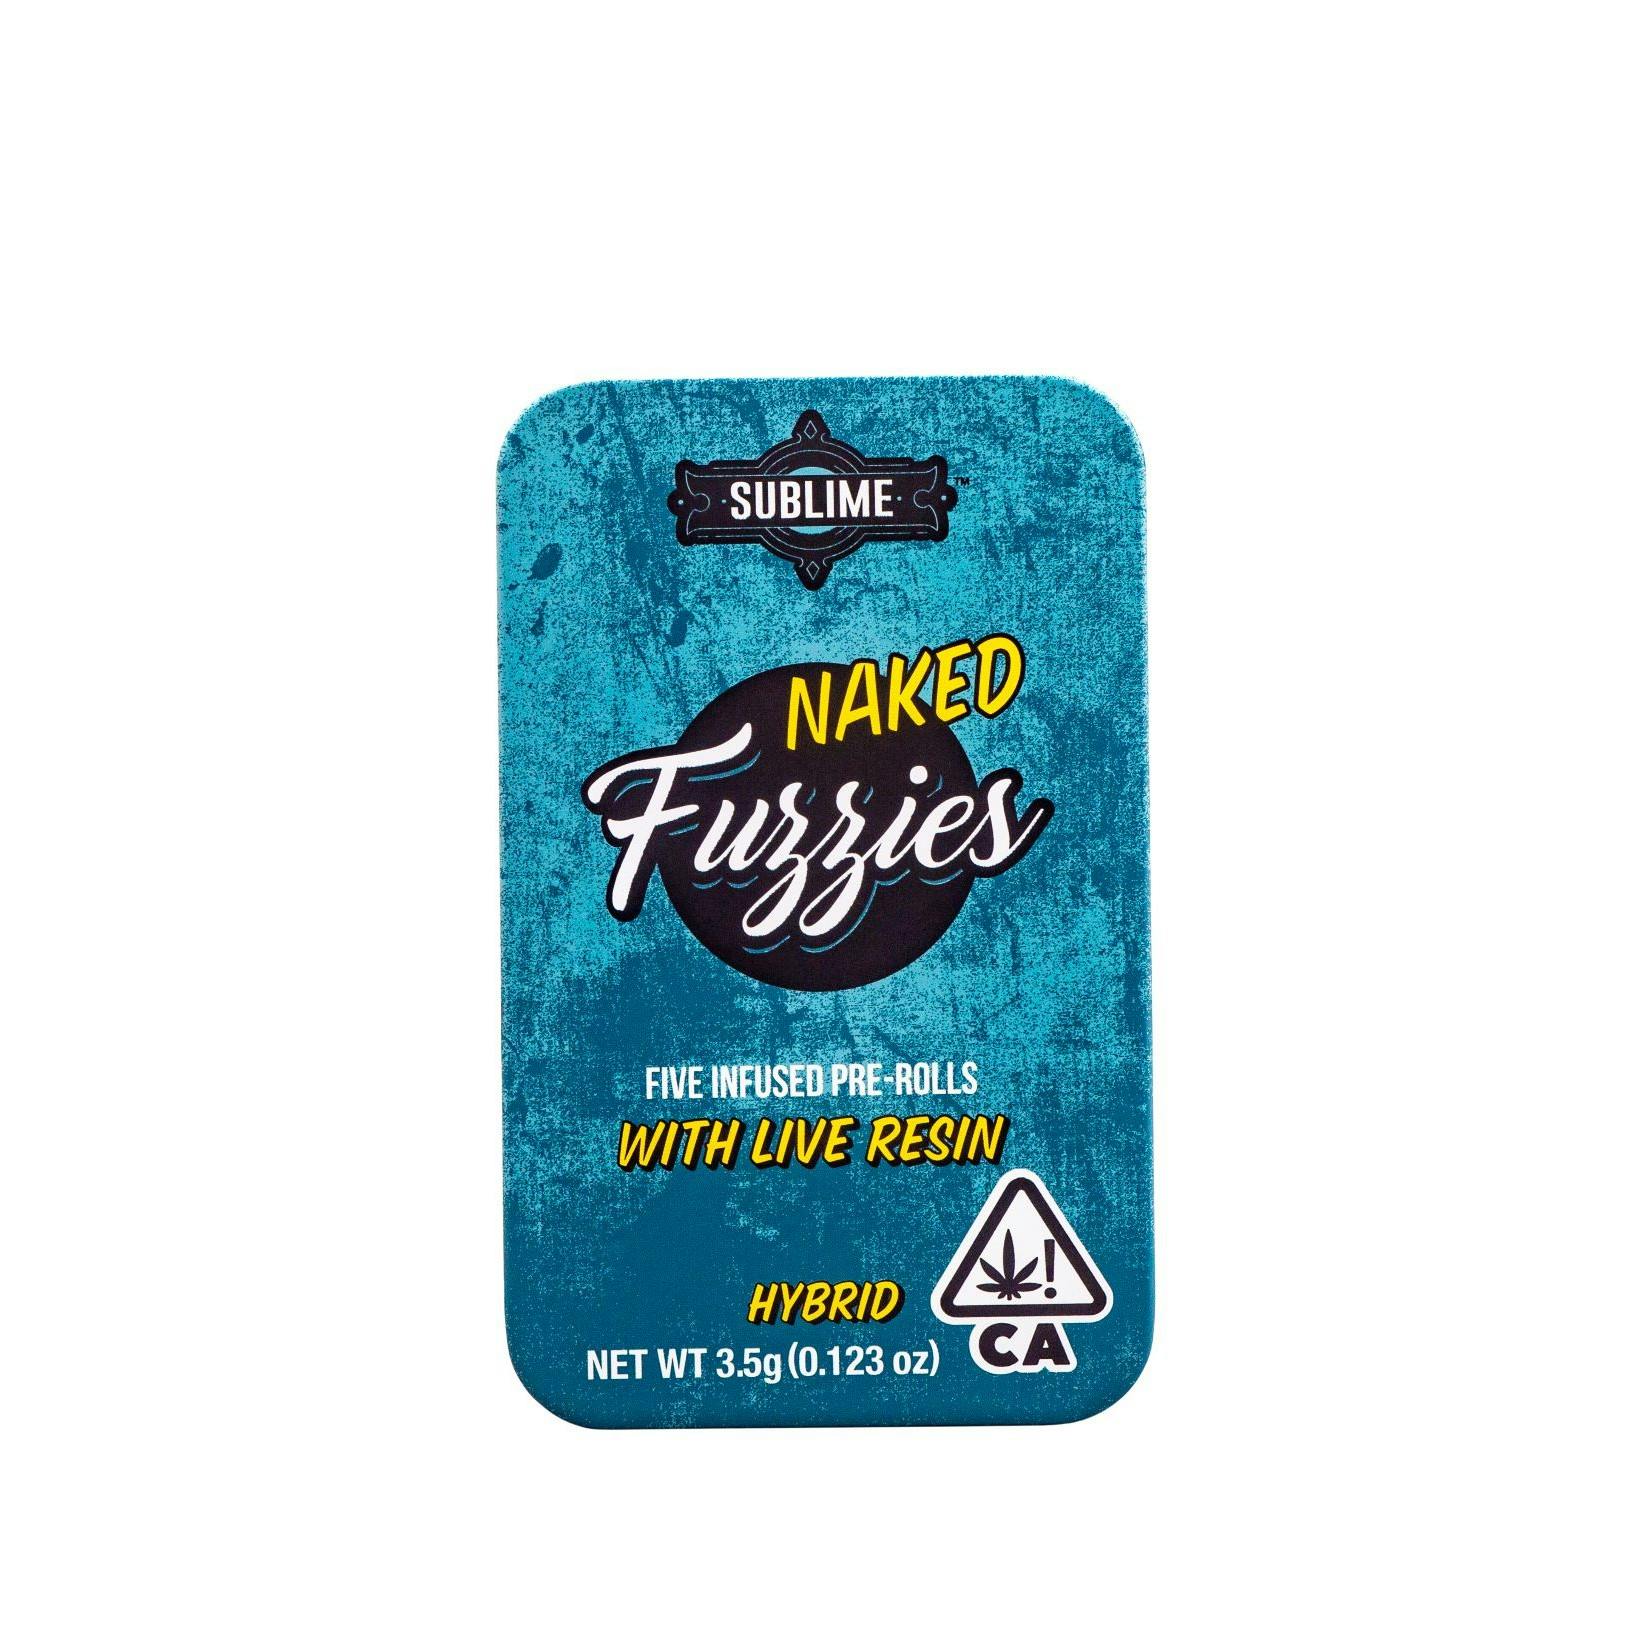 Naked Fuzzies with Live Resin - Hybrid 5pk [3.5g] - 22%+ THC